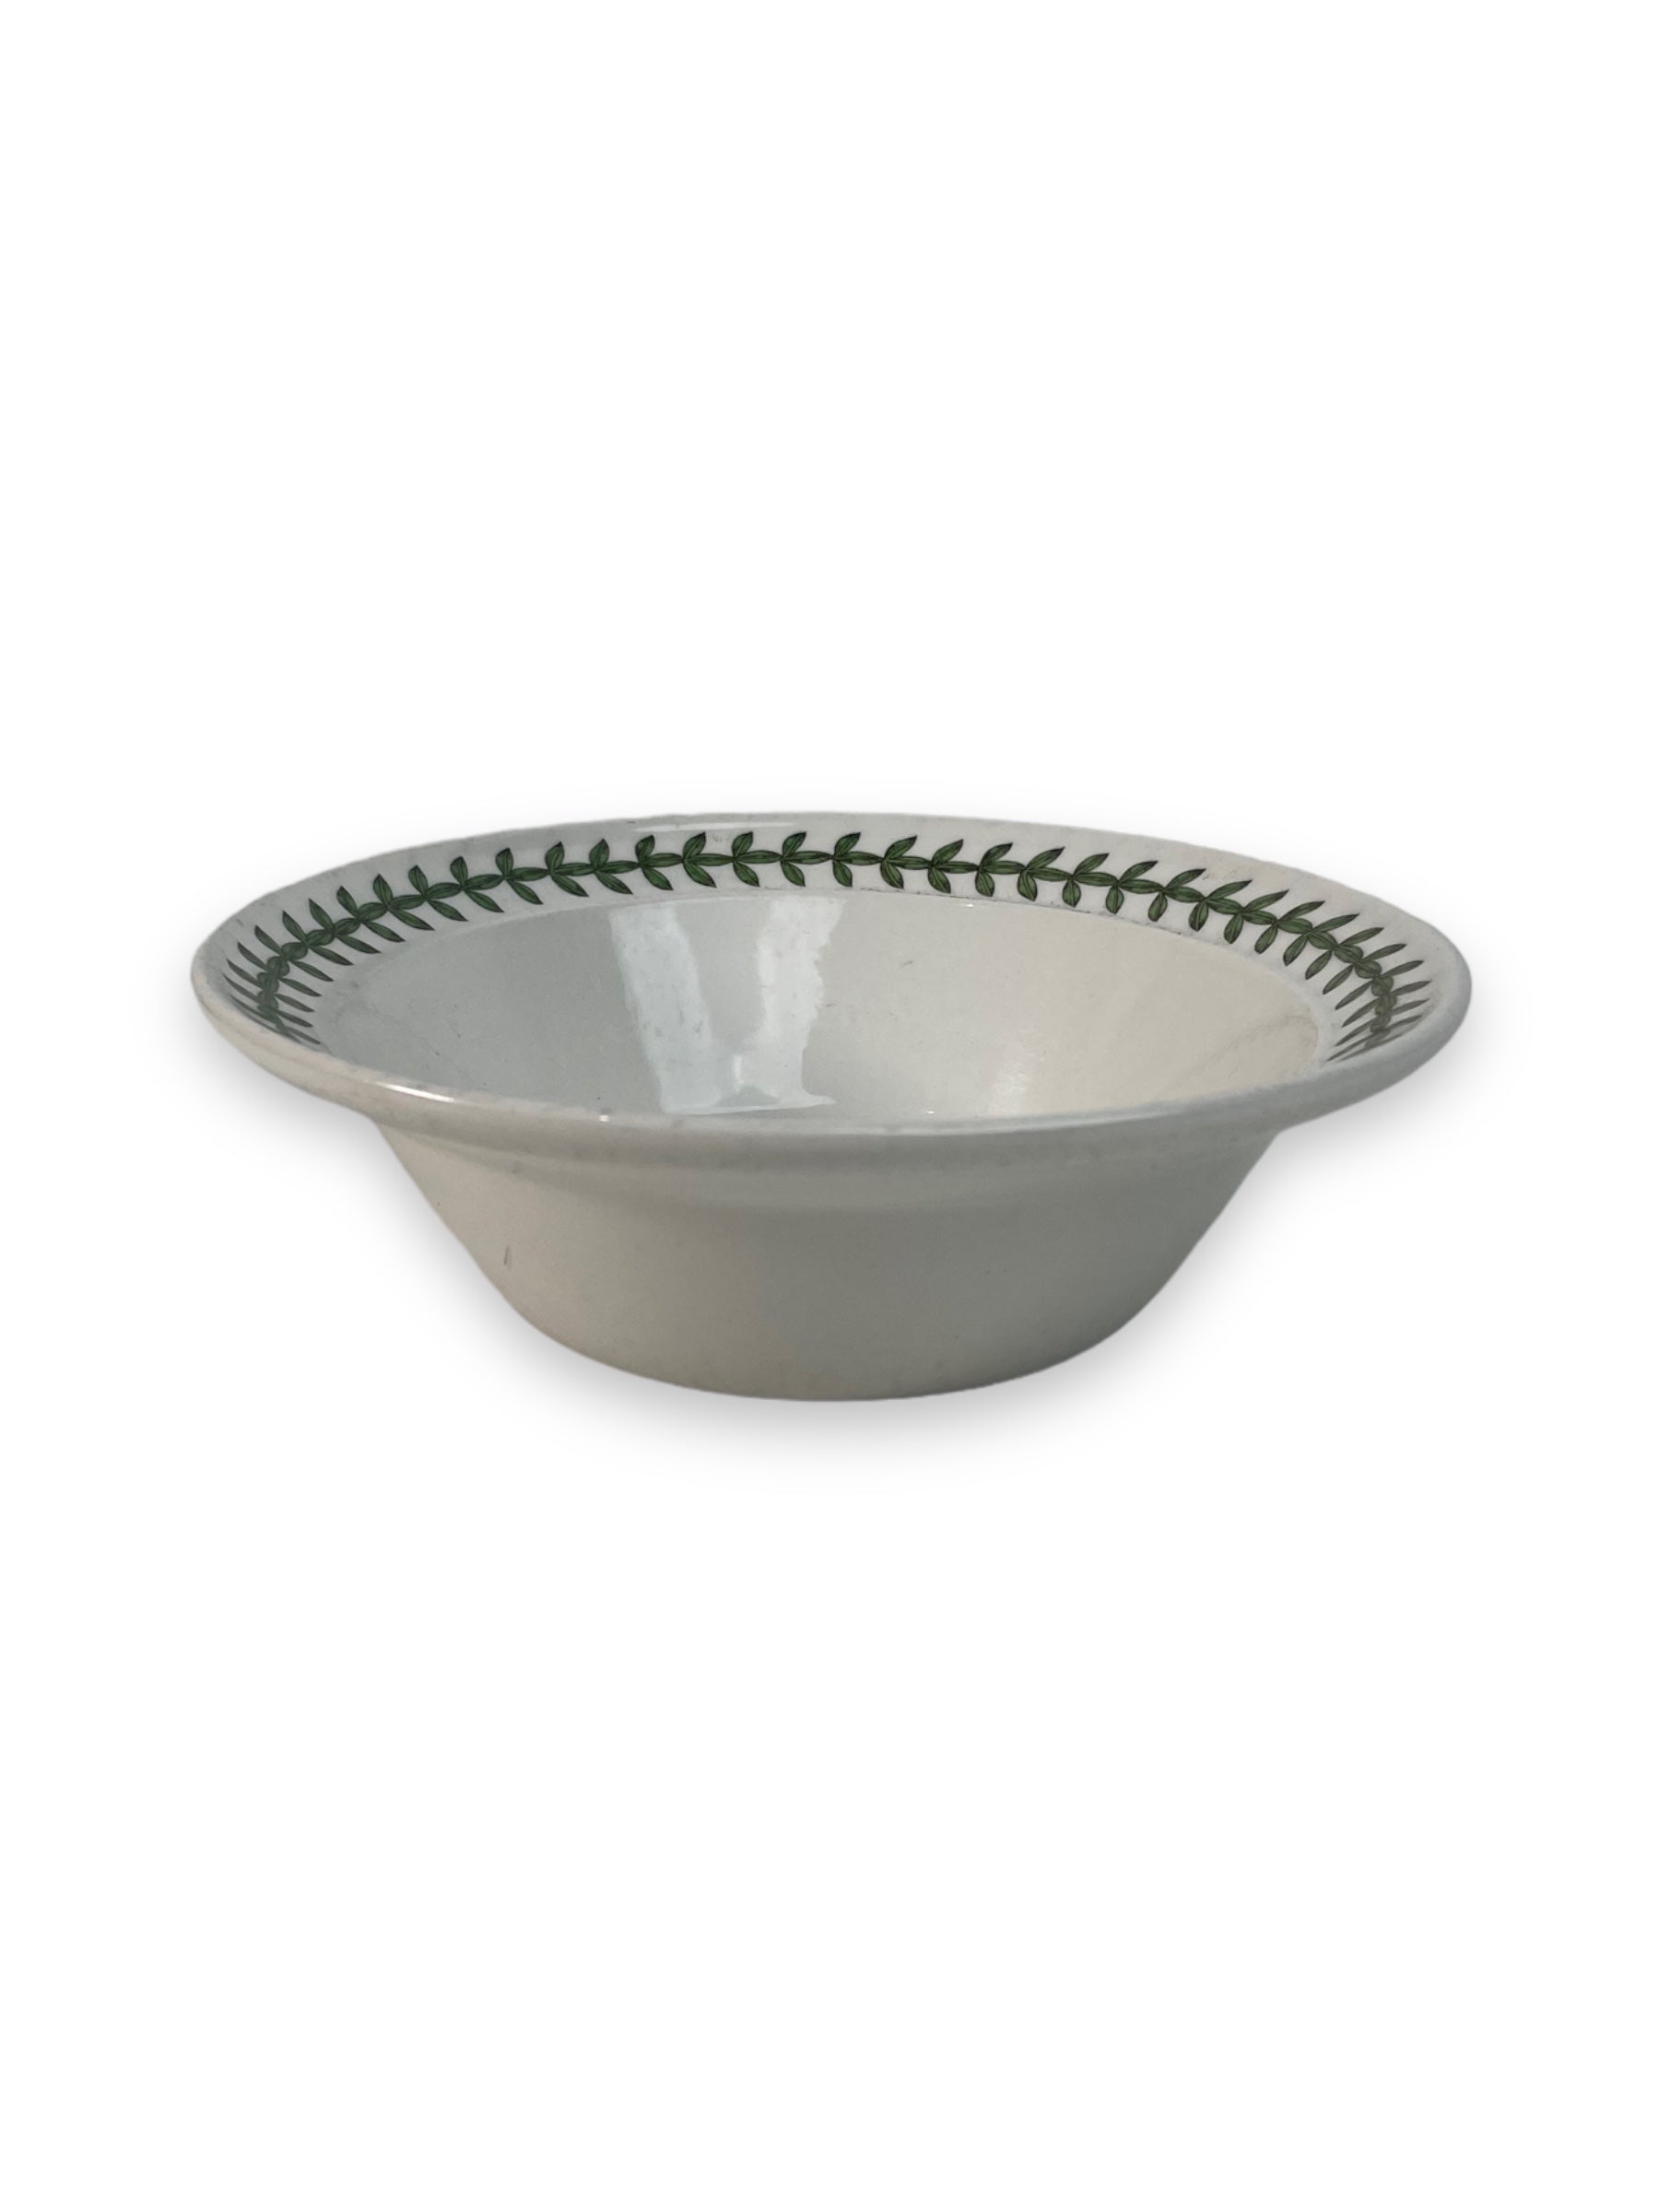 The Botanic Garden Forget-Me-Not Bowl by Portmeirion